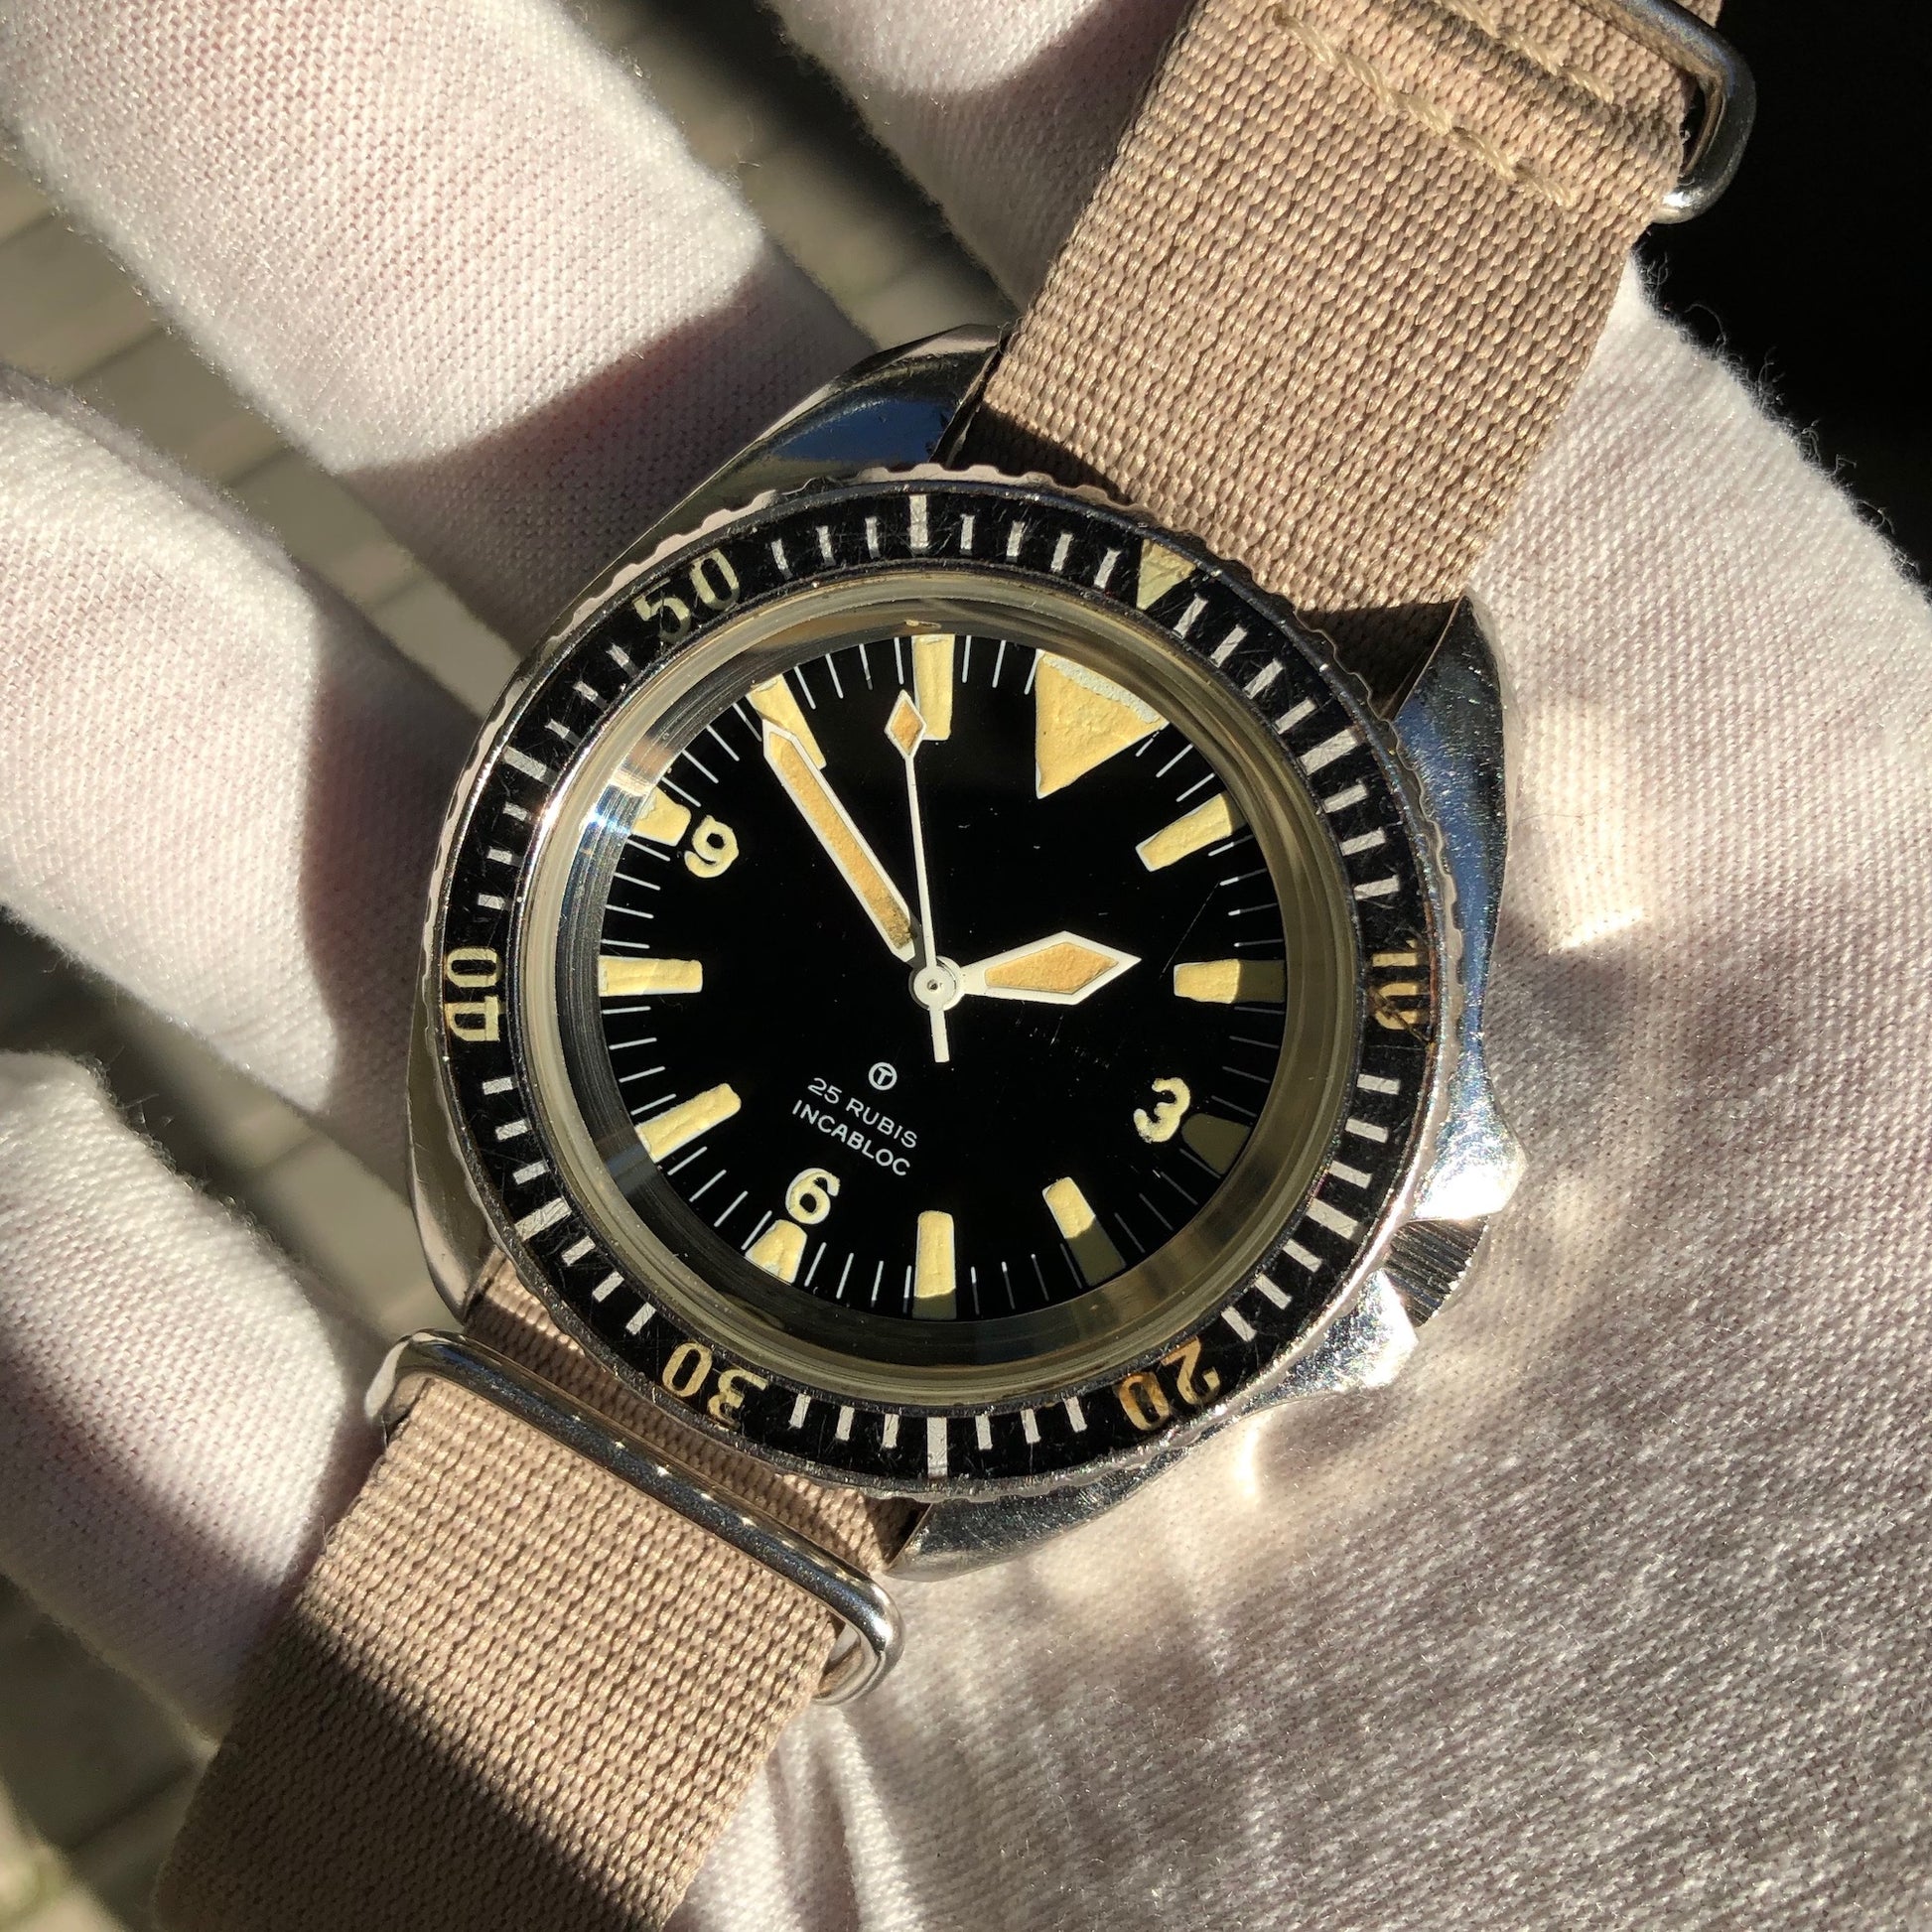 Vintage CWC Cabot Watch Company Royal Navy Sterile Milsub Divers Wristwatch Circa 1980 - Hashtag Watch Company